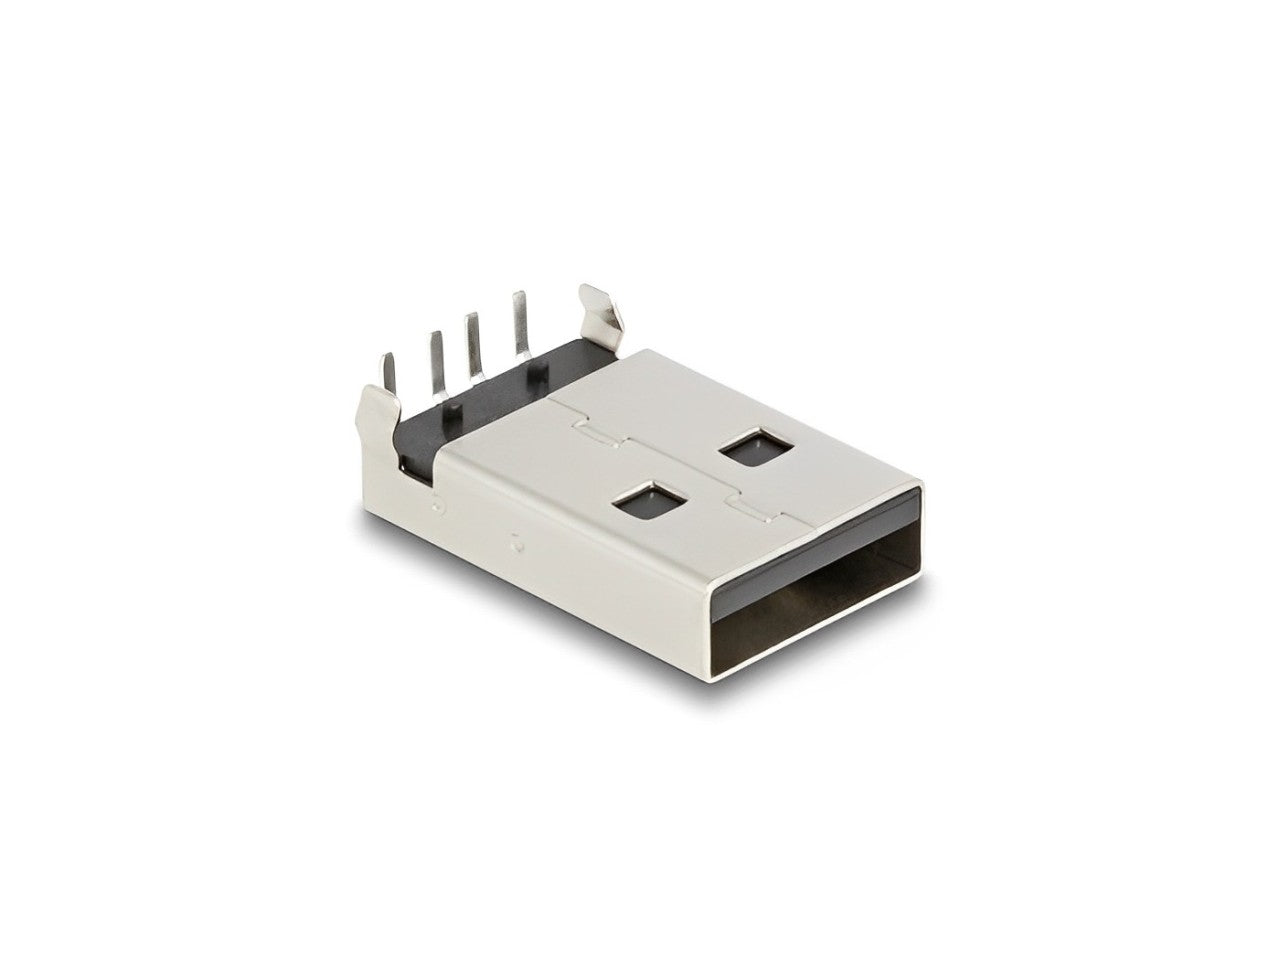 Delock USB 2.0 Type-A female 4 pin THT connector for through-hole mounting 90° angled 10 pieces - delock.israel